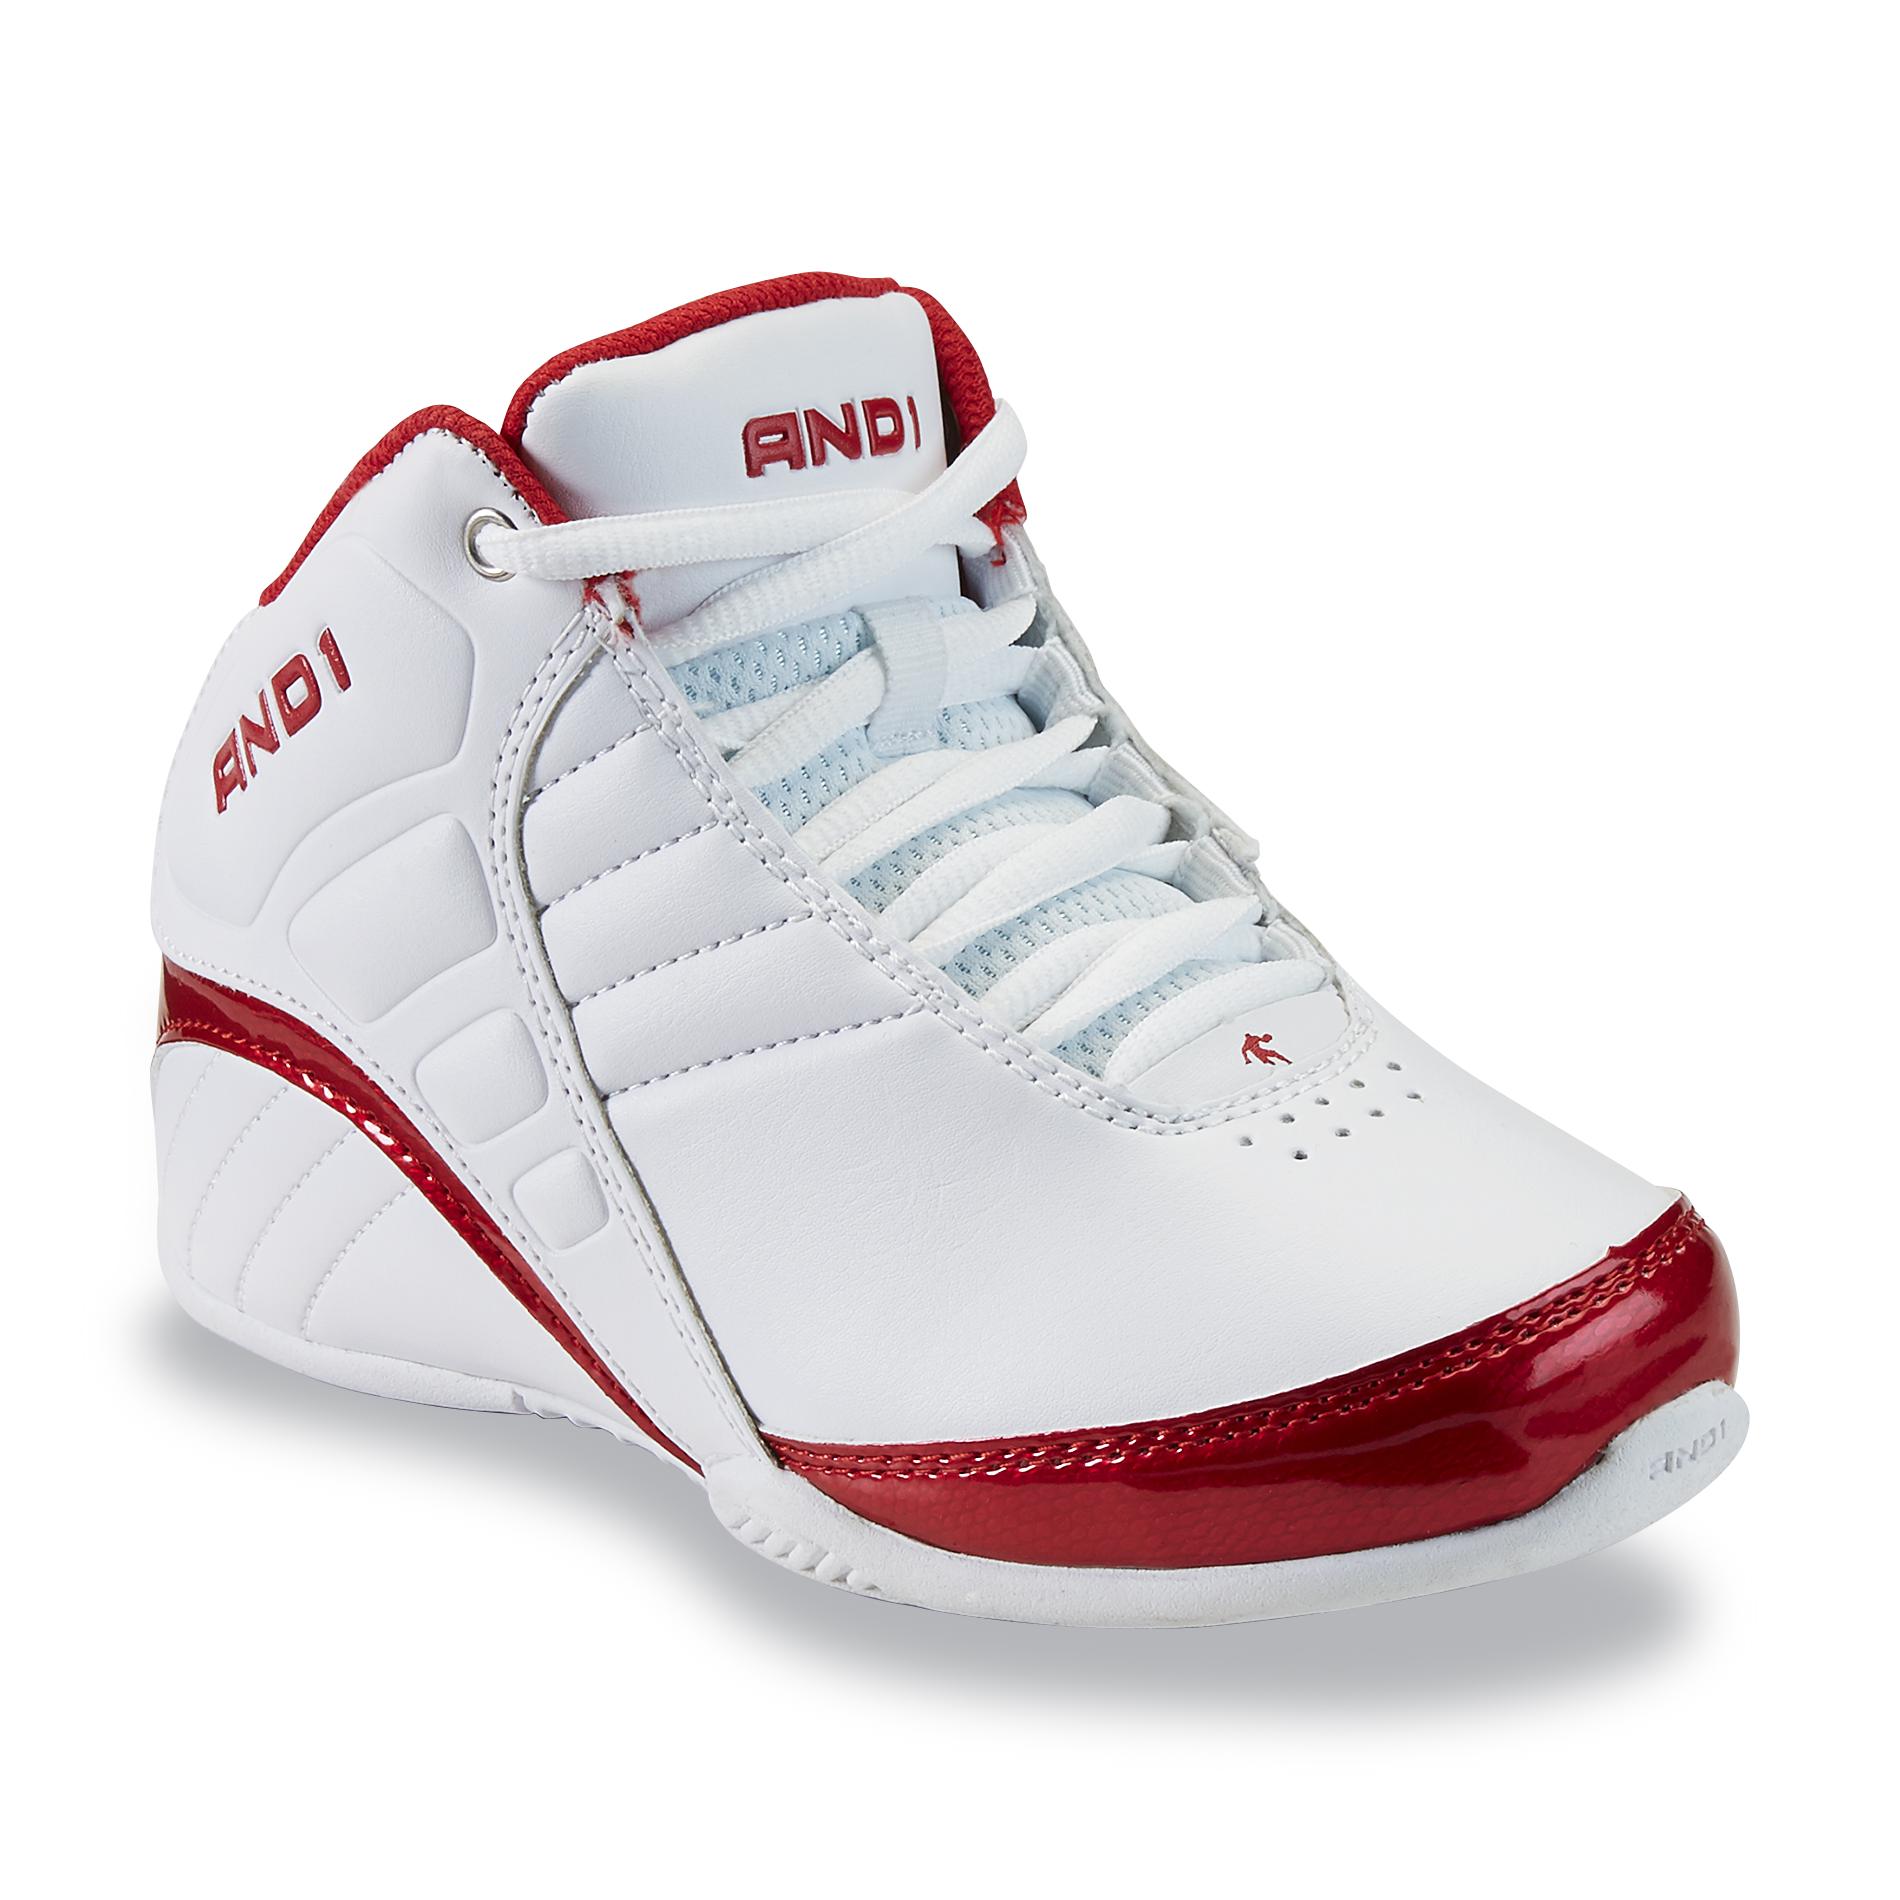 AND 1 Boy's Rocket White/Red HighTop Basketball Shoe